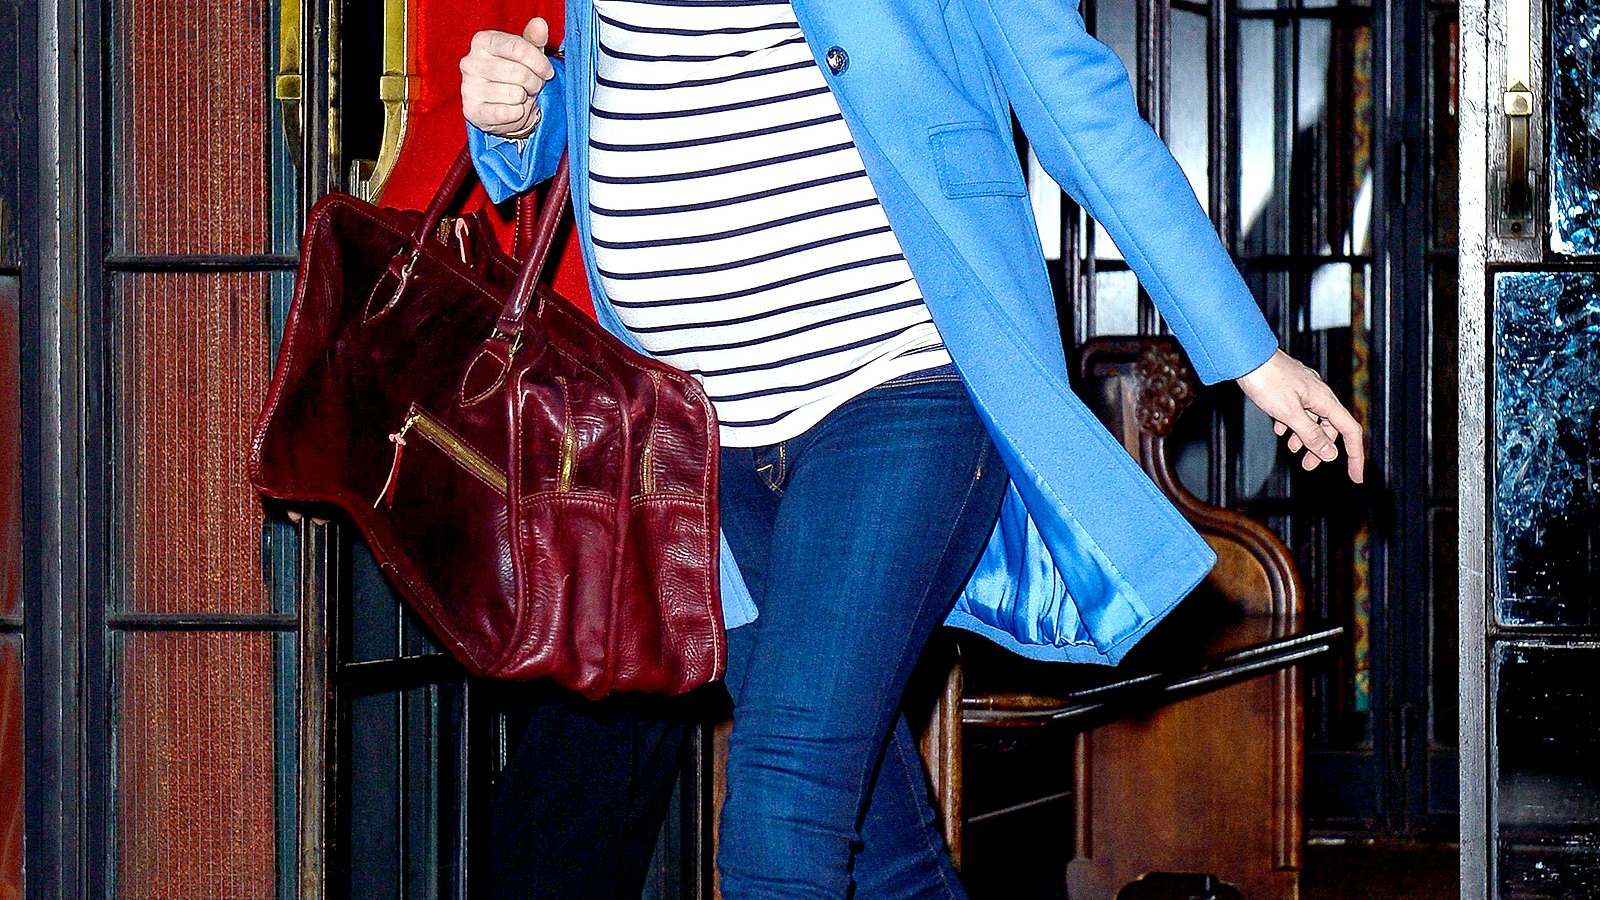 Blake Lively leaves her hotel on Dec. 4, 2014 in NYC.